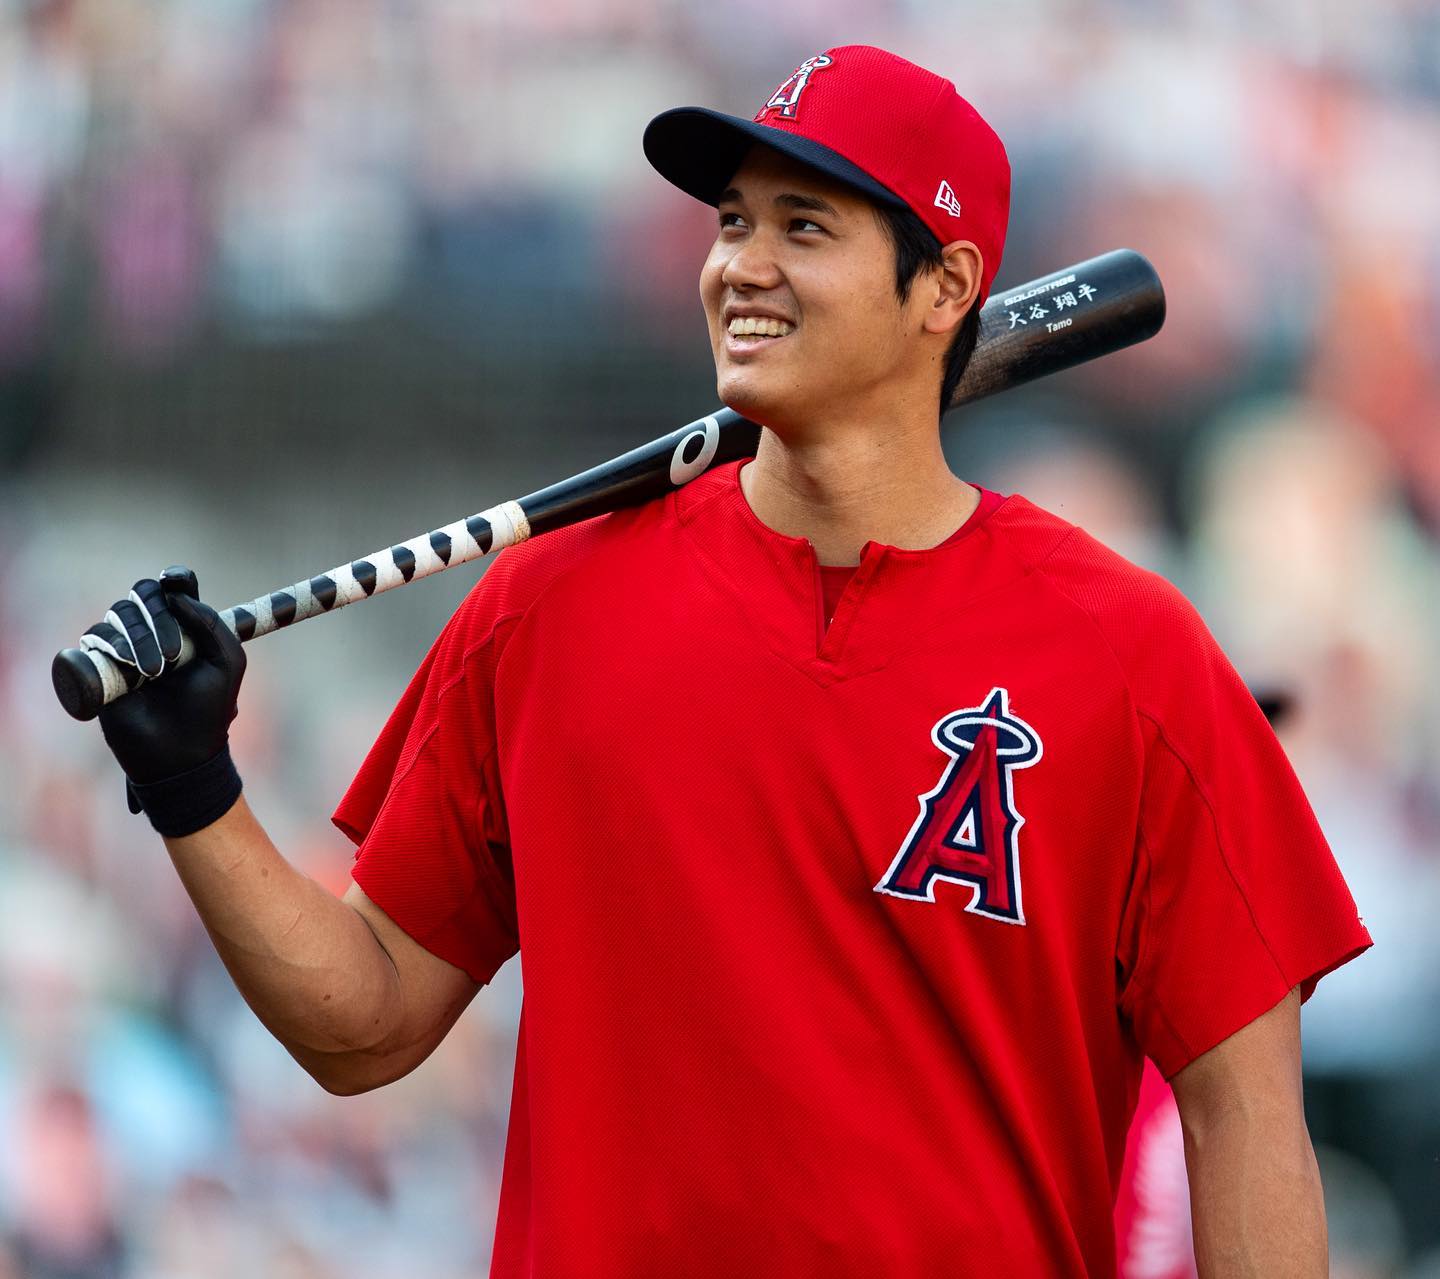 Shohei Ohtani Signs For The Dodgers